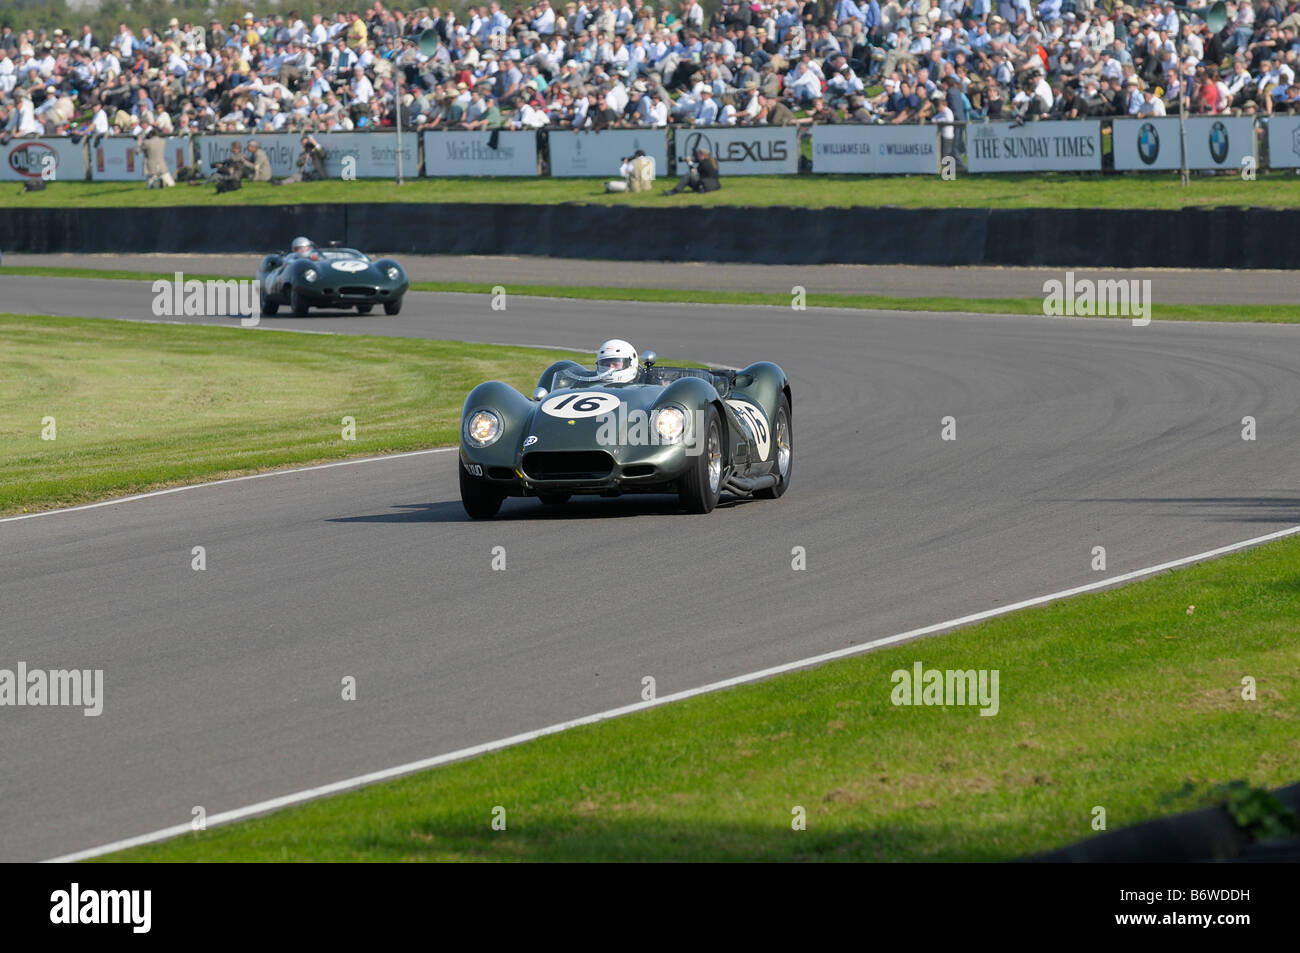 Goodwood riunione di settembre 2008 Chevrolet Lister Knobbly 1959 4600cc Jamie mcintyre Foto Stock